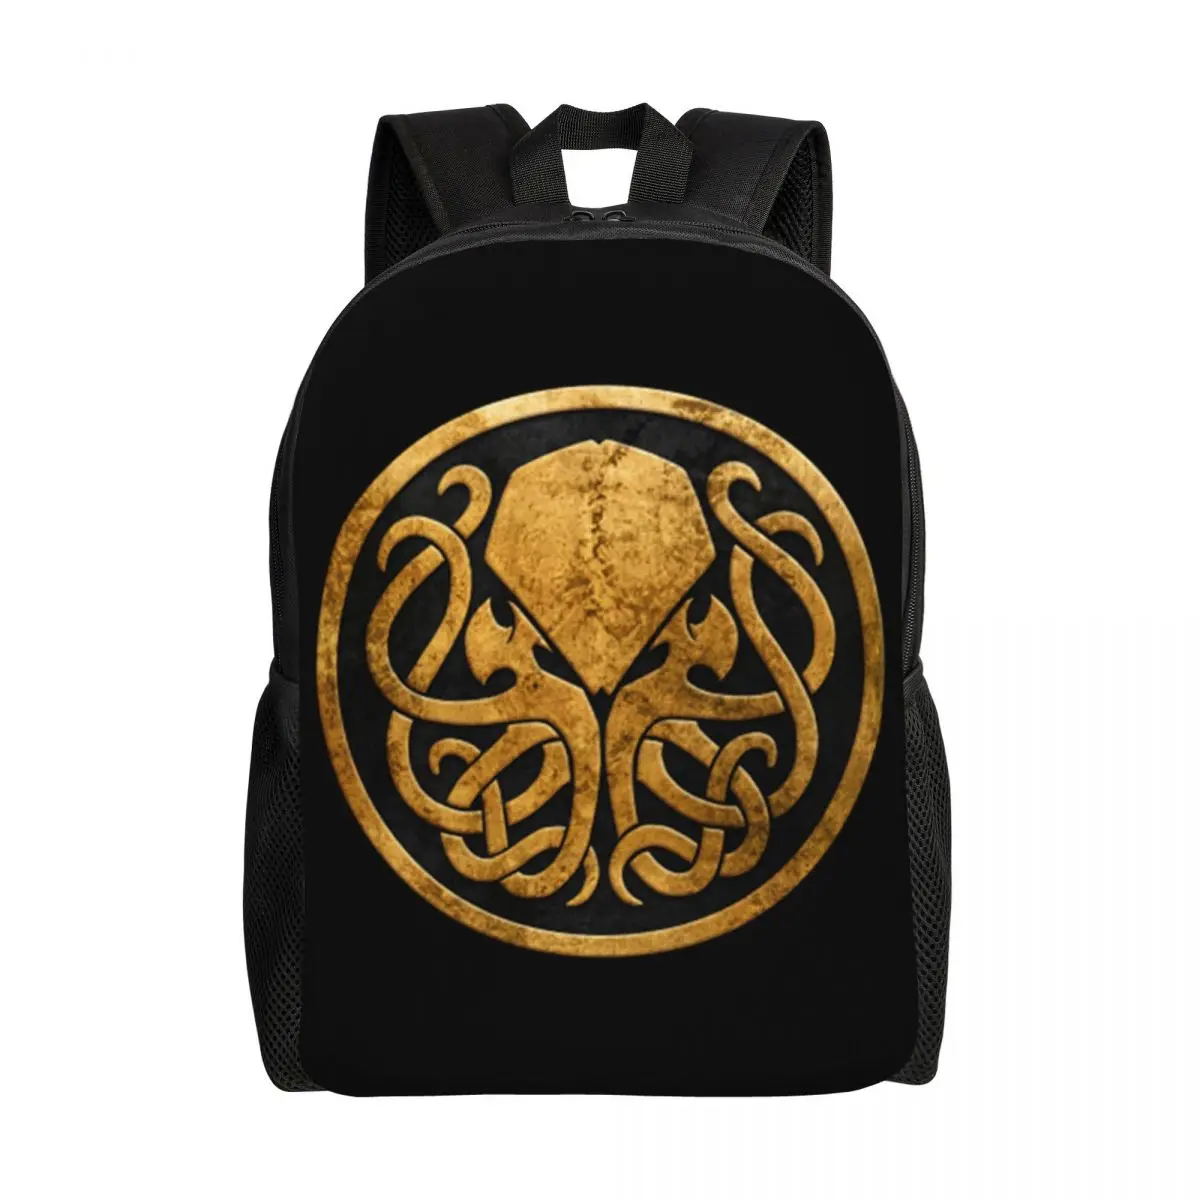 

Call Of Cthulhu Backpack for Boys Girls Lovecraft Monster Movie College School Travel Bags Men Women Bookbag Fits 15 Inch Laptop